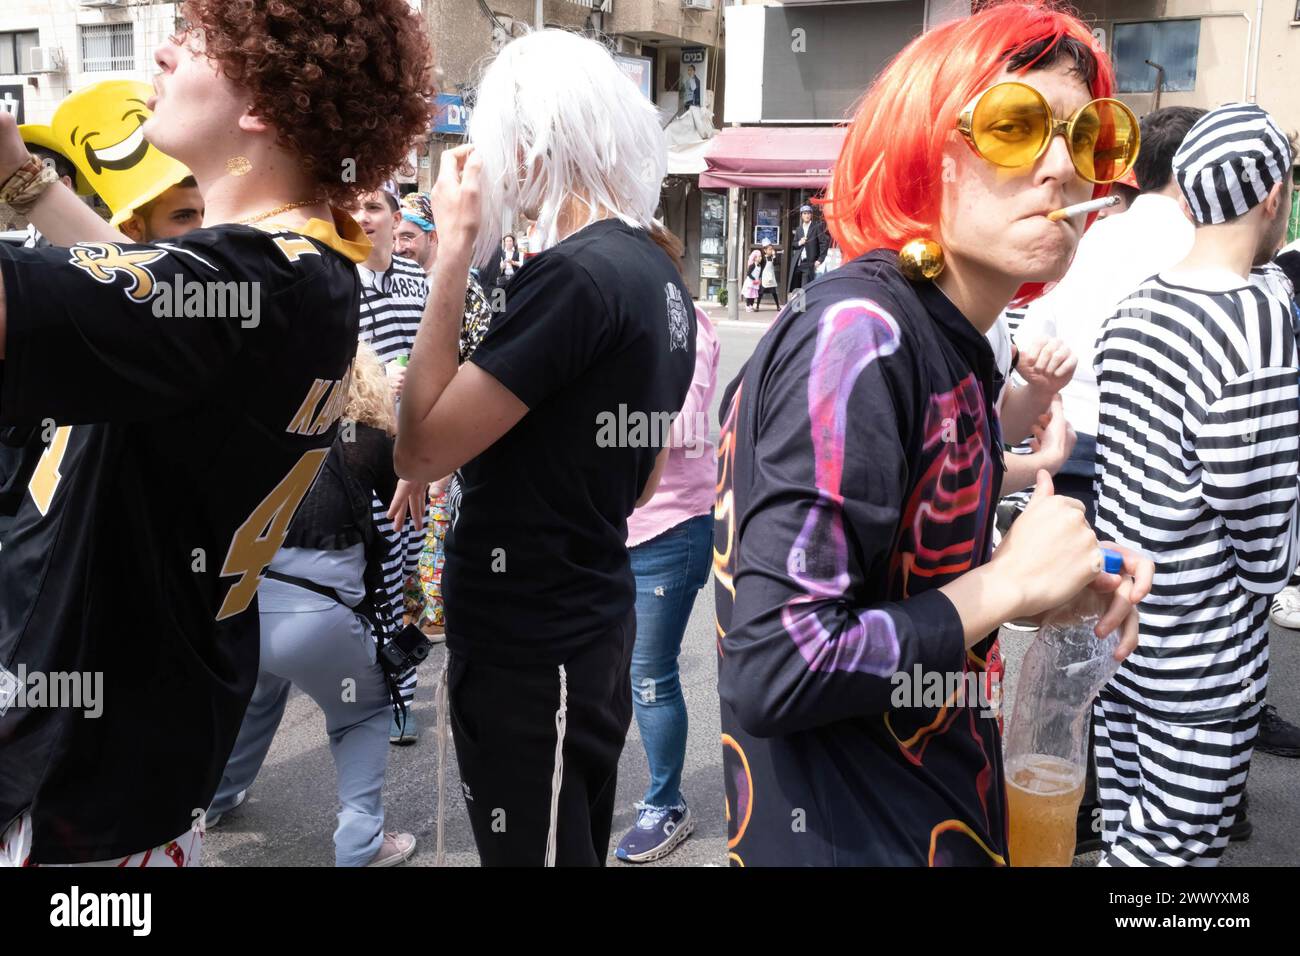 Bnei Brak, Israel. 24th Mar, 2024. A young man wearing an orange wig and sunglasses, smokes a cigarette during the Purim celebrations. Ultra-Orthodox Jews Celebrate Purim in Bnei Brak, Israel. The holiday commemorates the salvation of the Jews in ancient Persia from a plot to annihilate them. A joyous holiday, it is celebrated by both secular and nonsecular Jews, most notably by dressing up in costumes and drinking, according to the Talmud, 'until they cannot distinguish between ''˜cursed is Haman' and ''˜blessed is Mordechai. (Credit Image: © Syndi Pilar/SOPA Images via ZUMA Press Wire) E Stock Photo